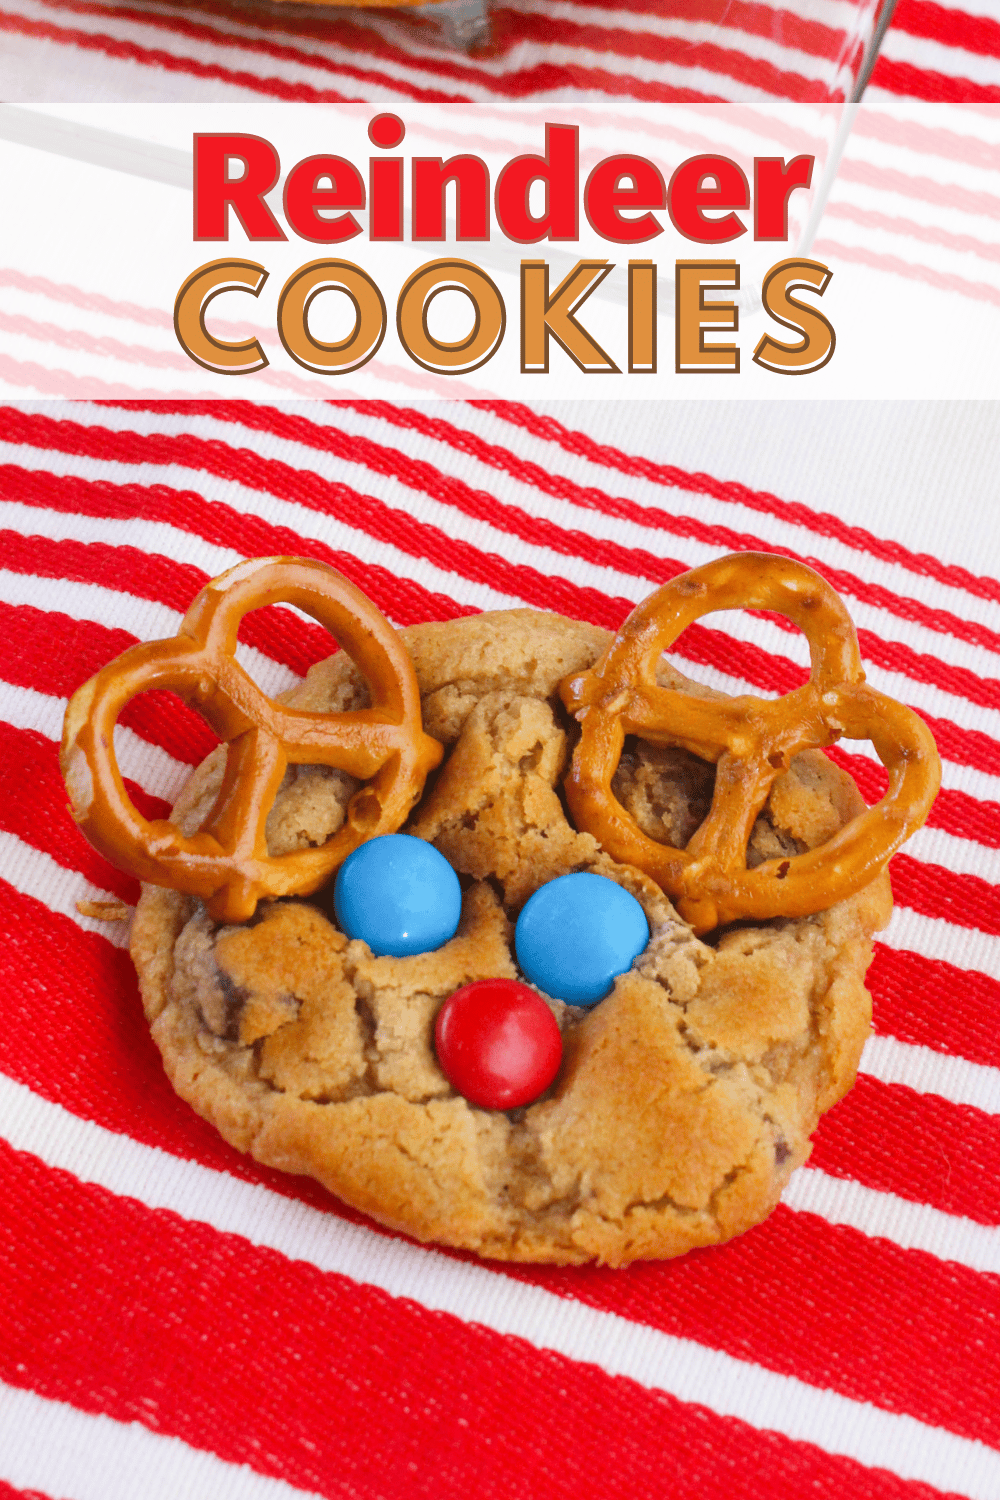 These Reindeer Cookies are perfect for the holidays! Made with just a few simple ingredients, the kids will love helping you make them. #reindeercookies #christmascookies #reindeer #cookies #recipe via @wondermomwannab